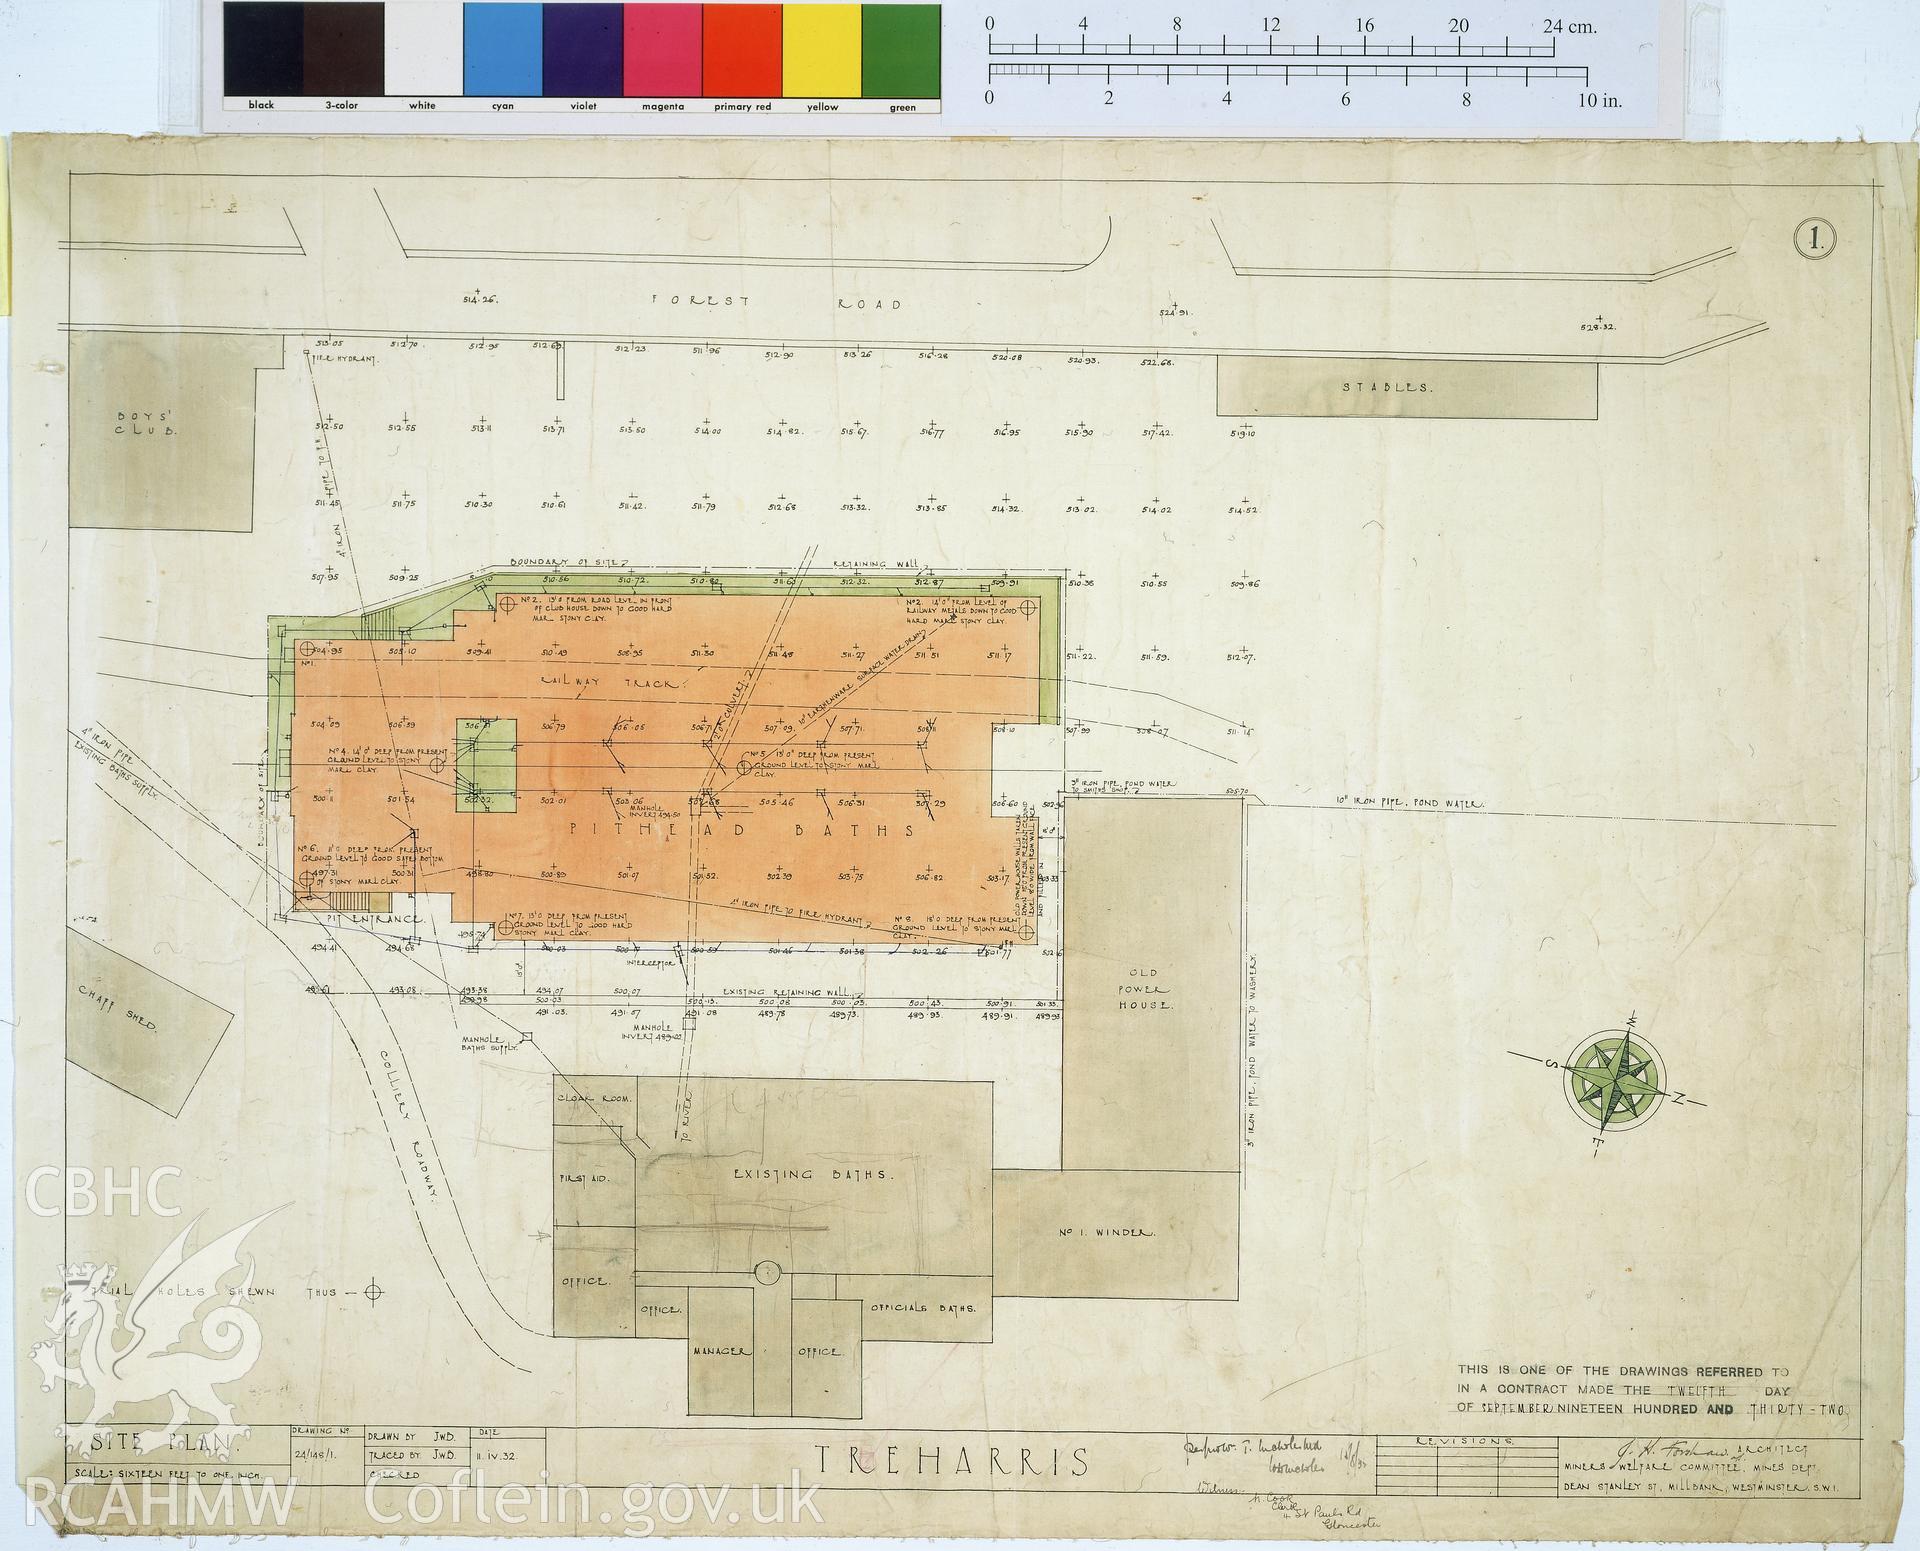 Colour transparency of a measured drawing showing site plan of the Bath House at  Ocean Deep Navigation Colliery , by J.H. Forshaw, Architect, 1932, from originals currently held by Gwent Record Office pending distribution to relevant county.